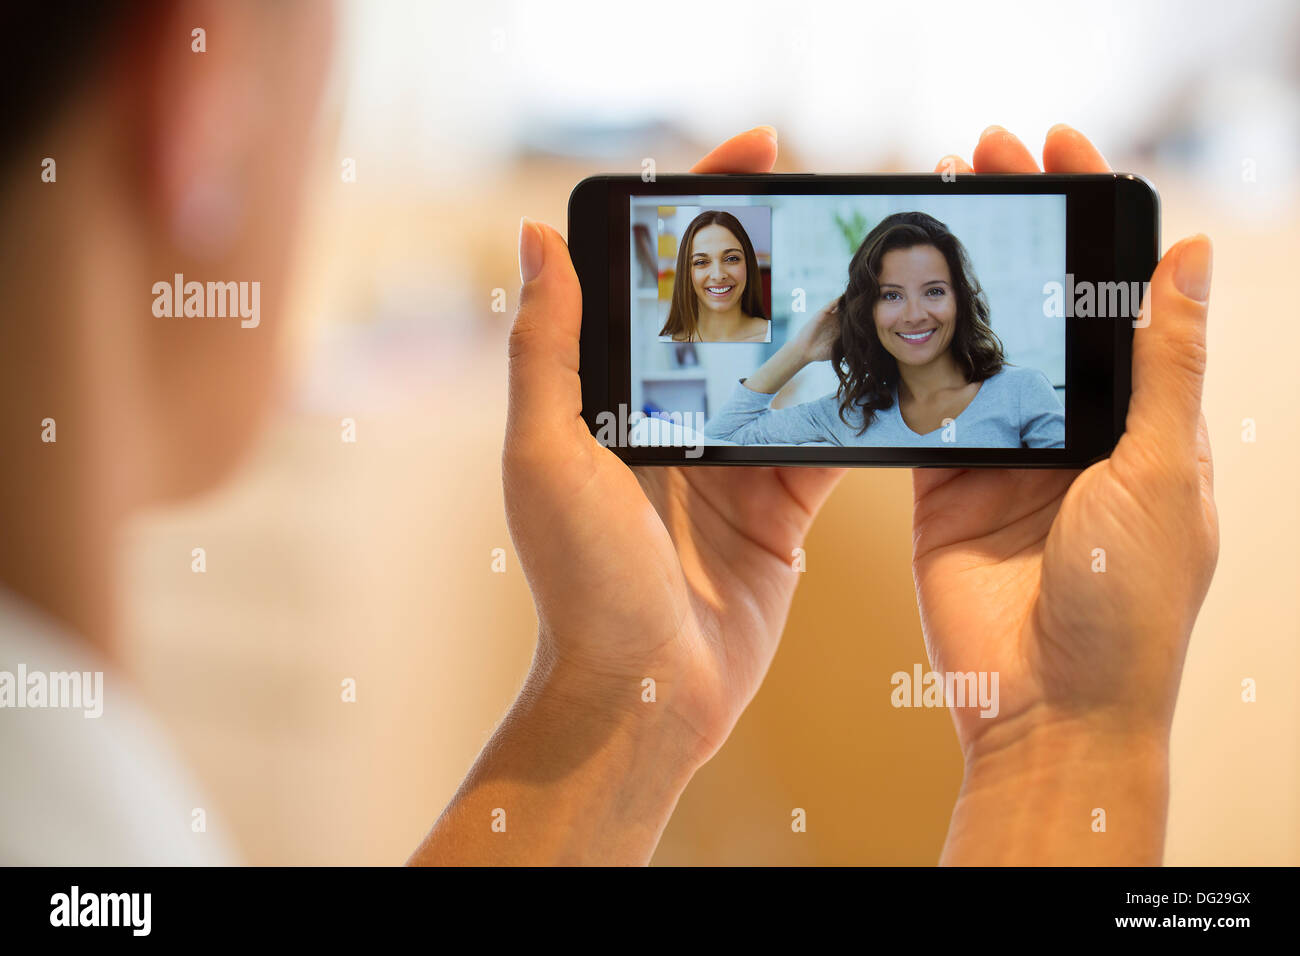 Woman chatting with her friend on smartphone Stock Photo